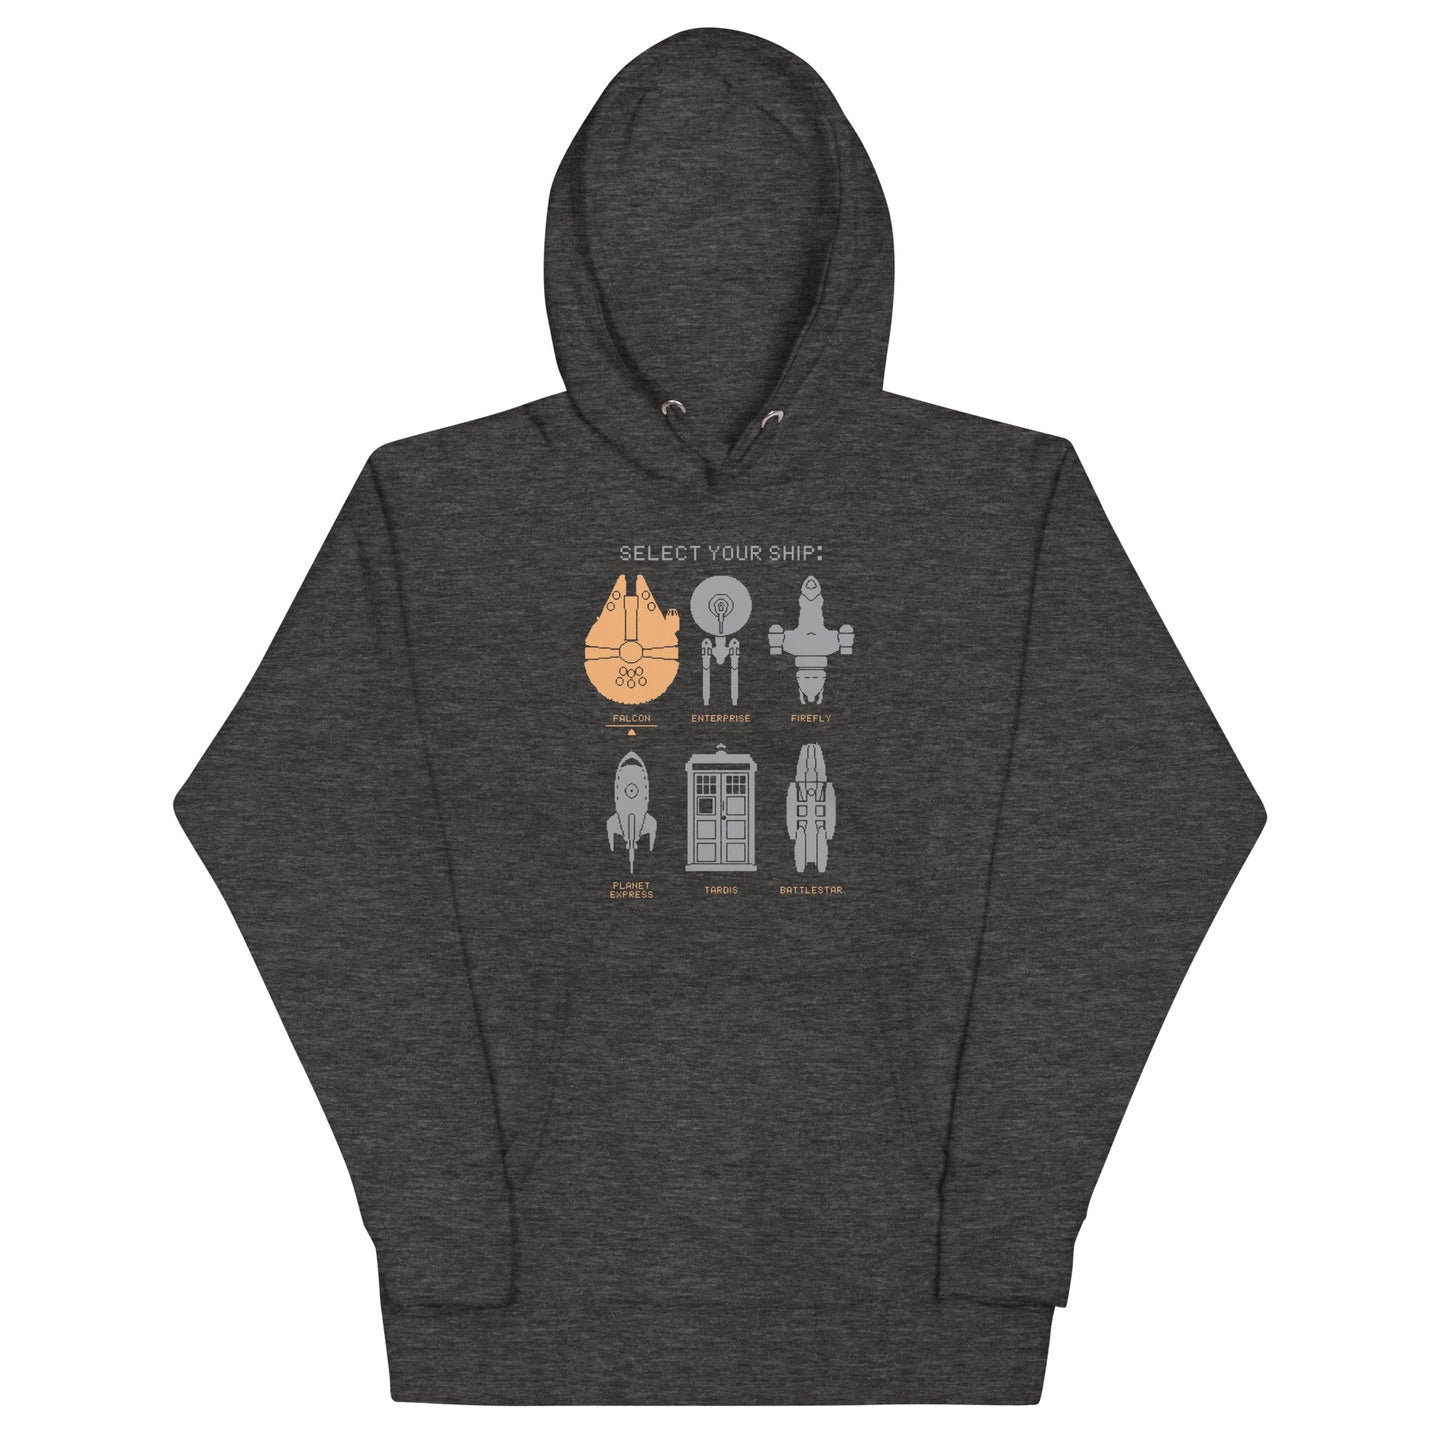 Select Your Ship Unisex Hoodie